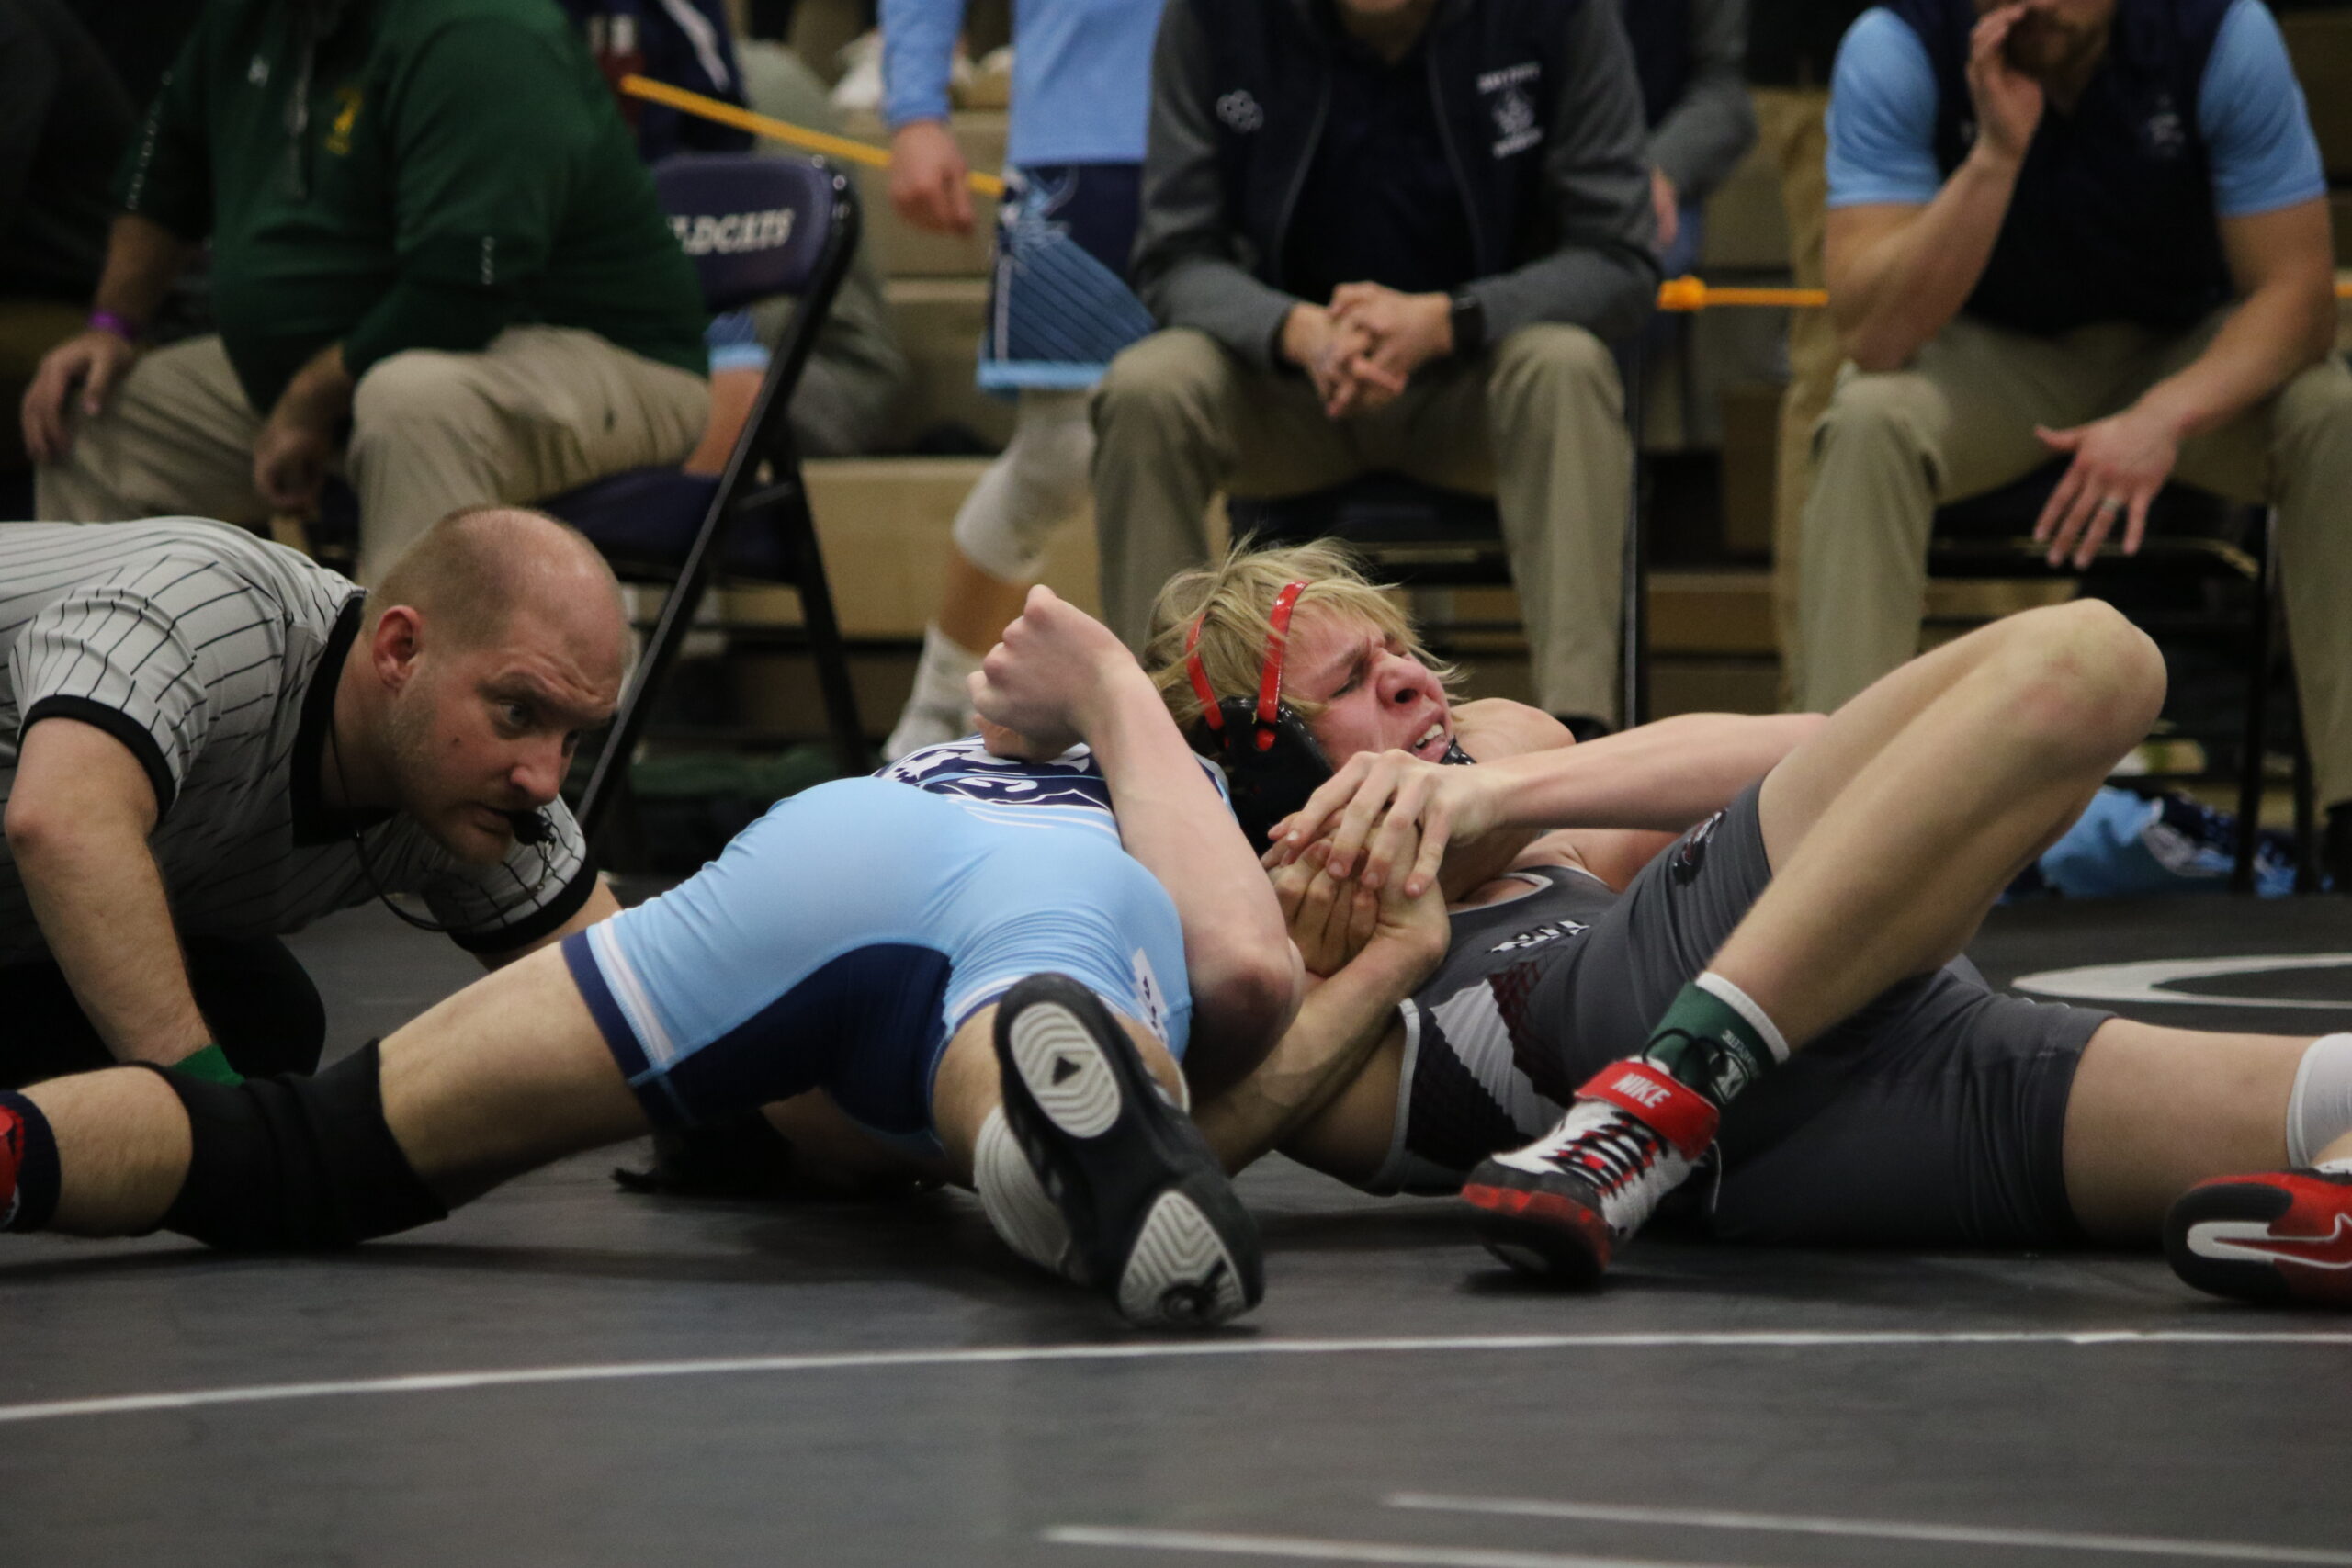 Bay Port wins regional title, also advances to team sectionals